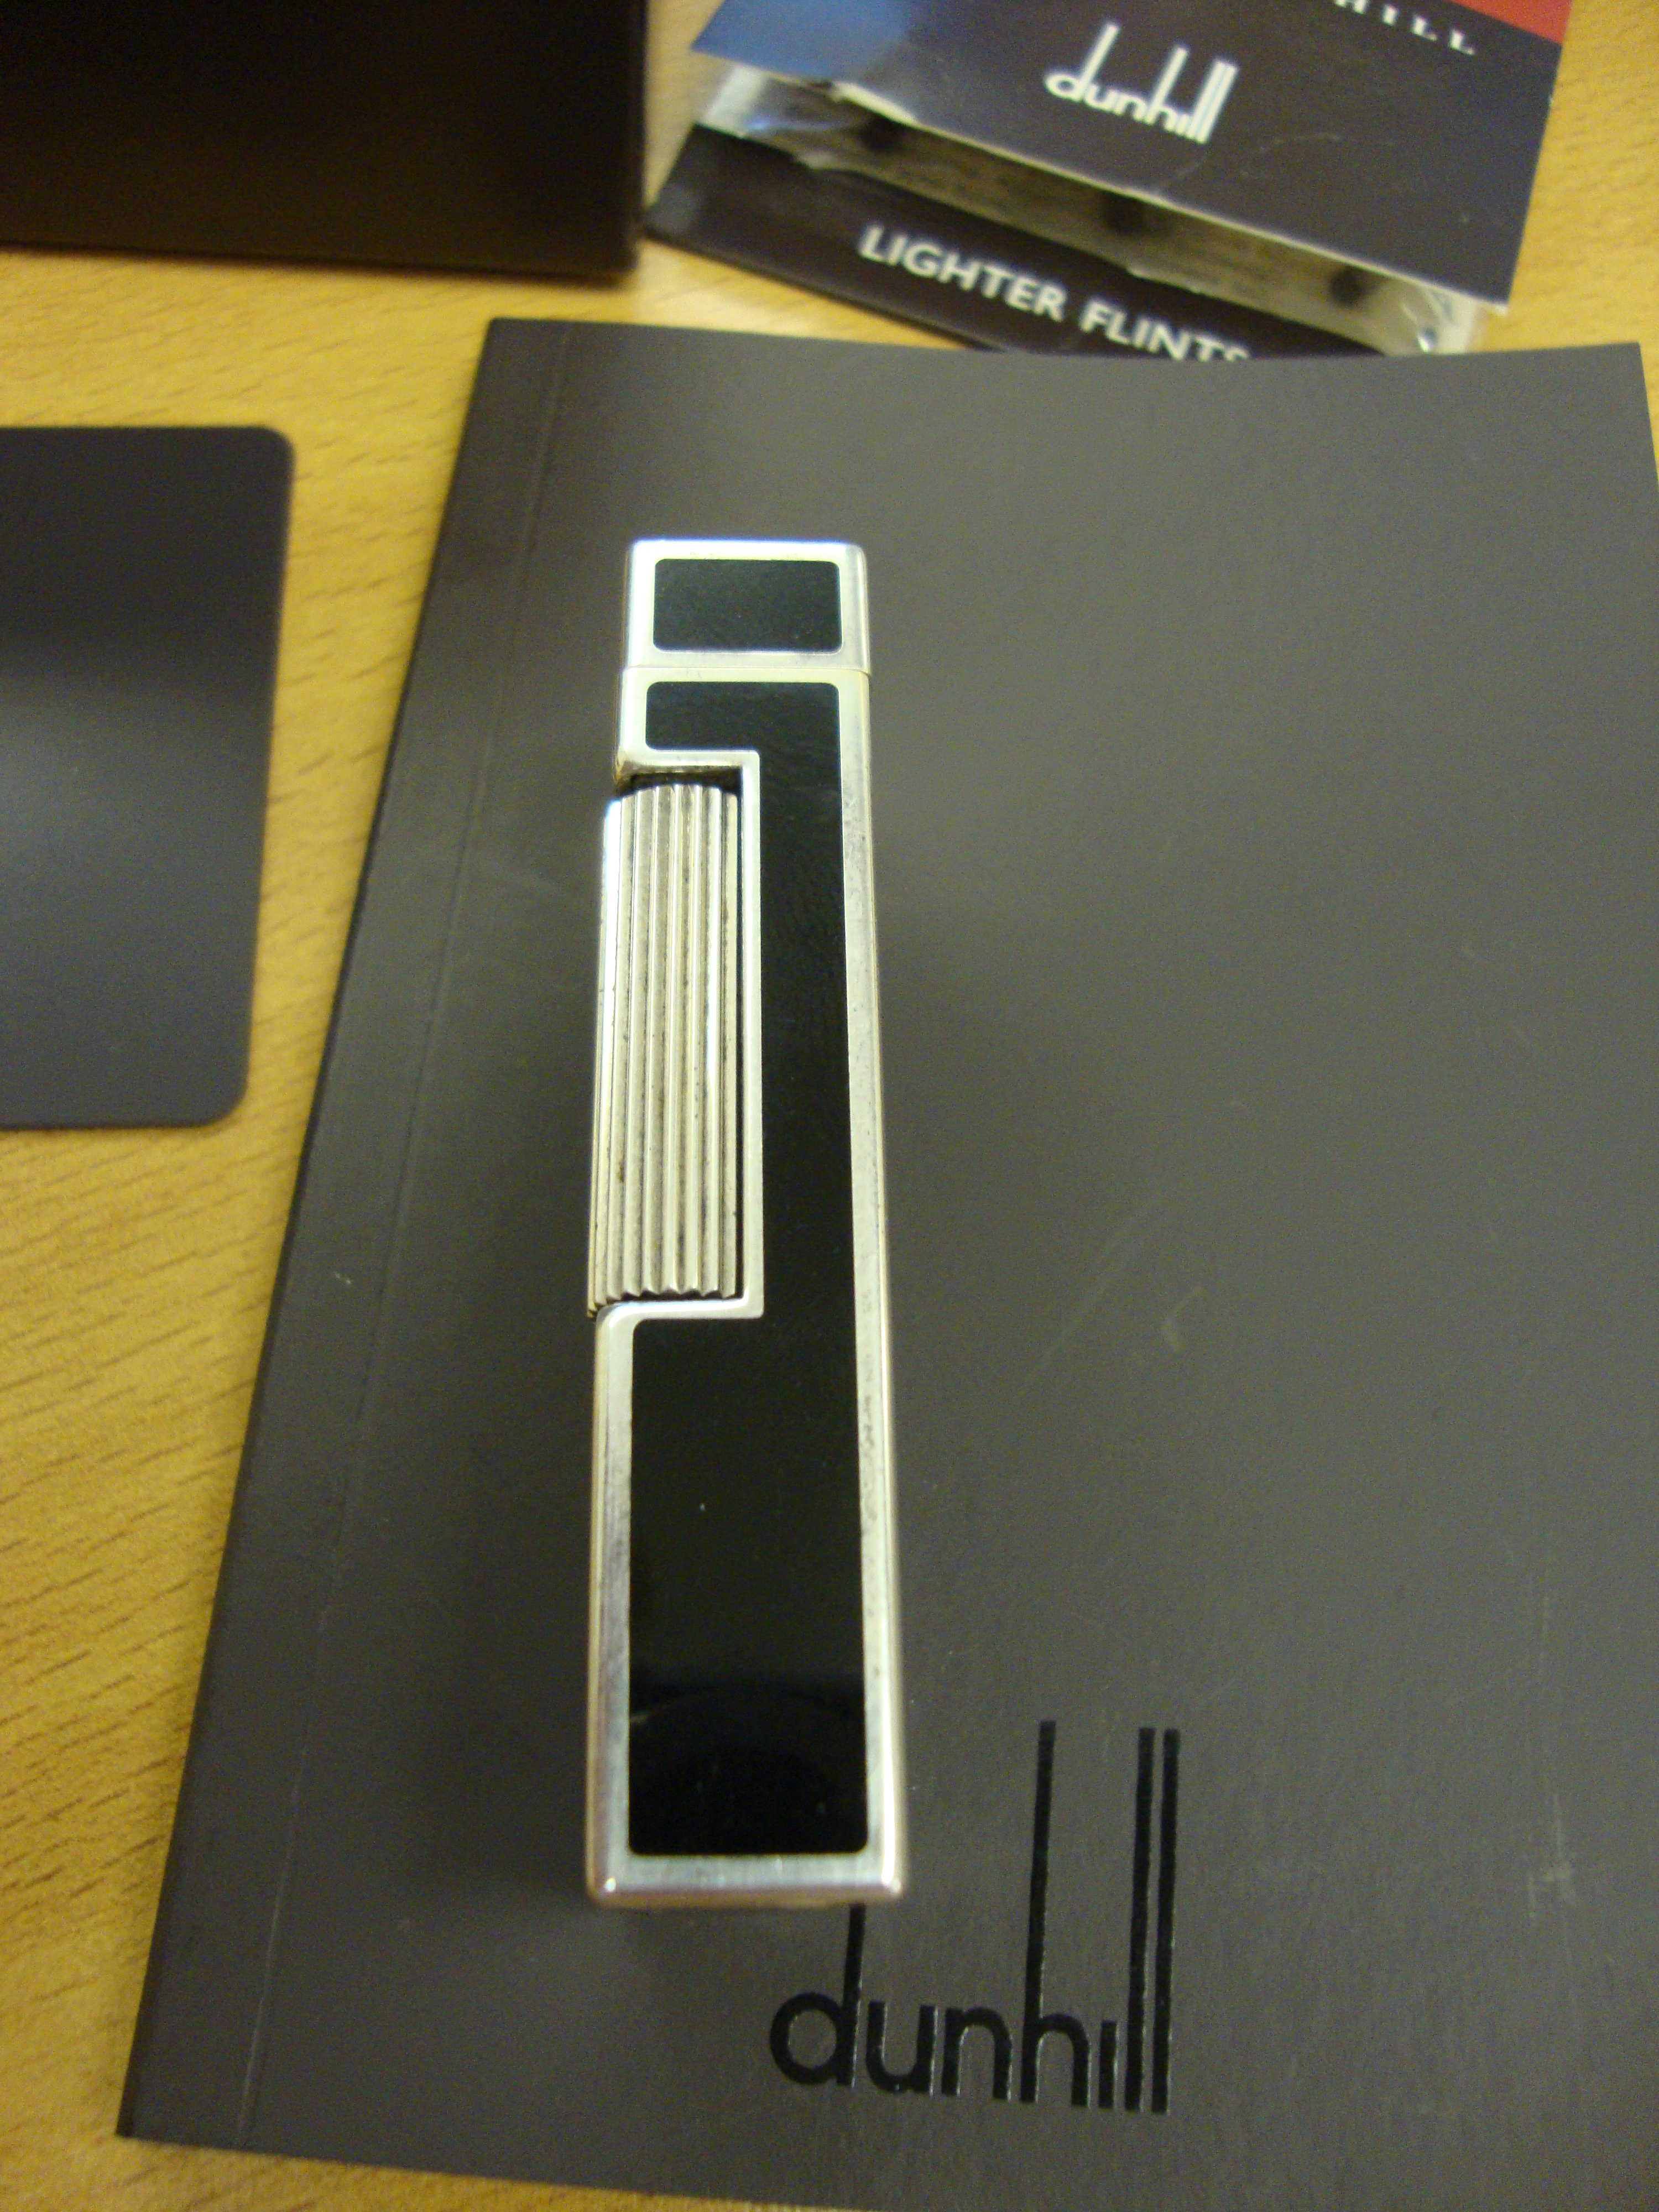 Dunhill rollagas lighter, model RL2301, in black laquer and silver, including box, book packs & - Image 6 of 12